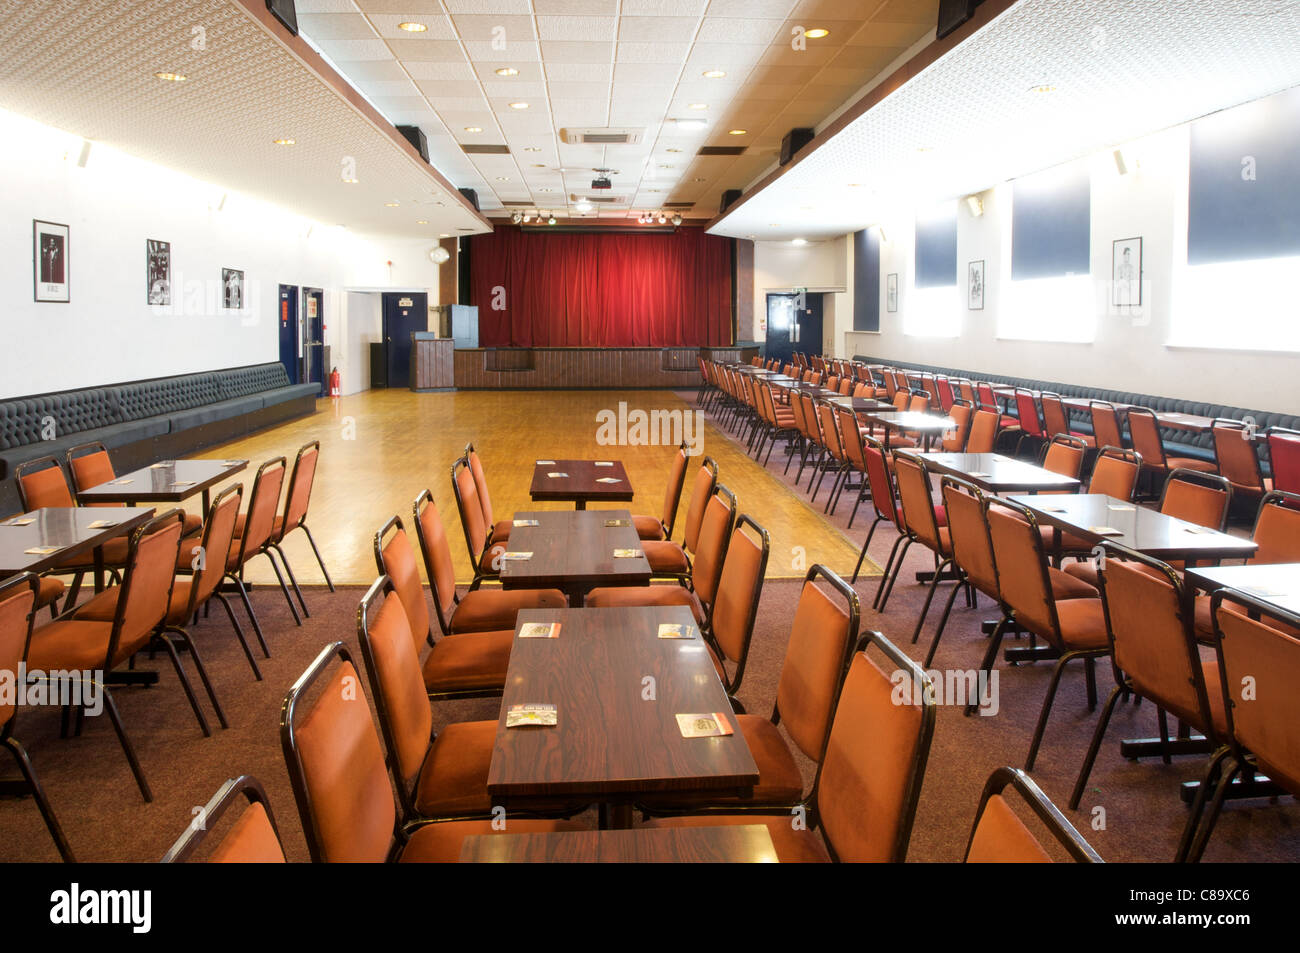 Interior of the Wallsend Labour Club, Newcastle, UK Stock Photo